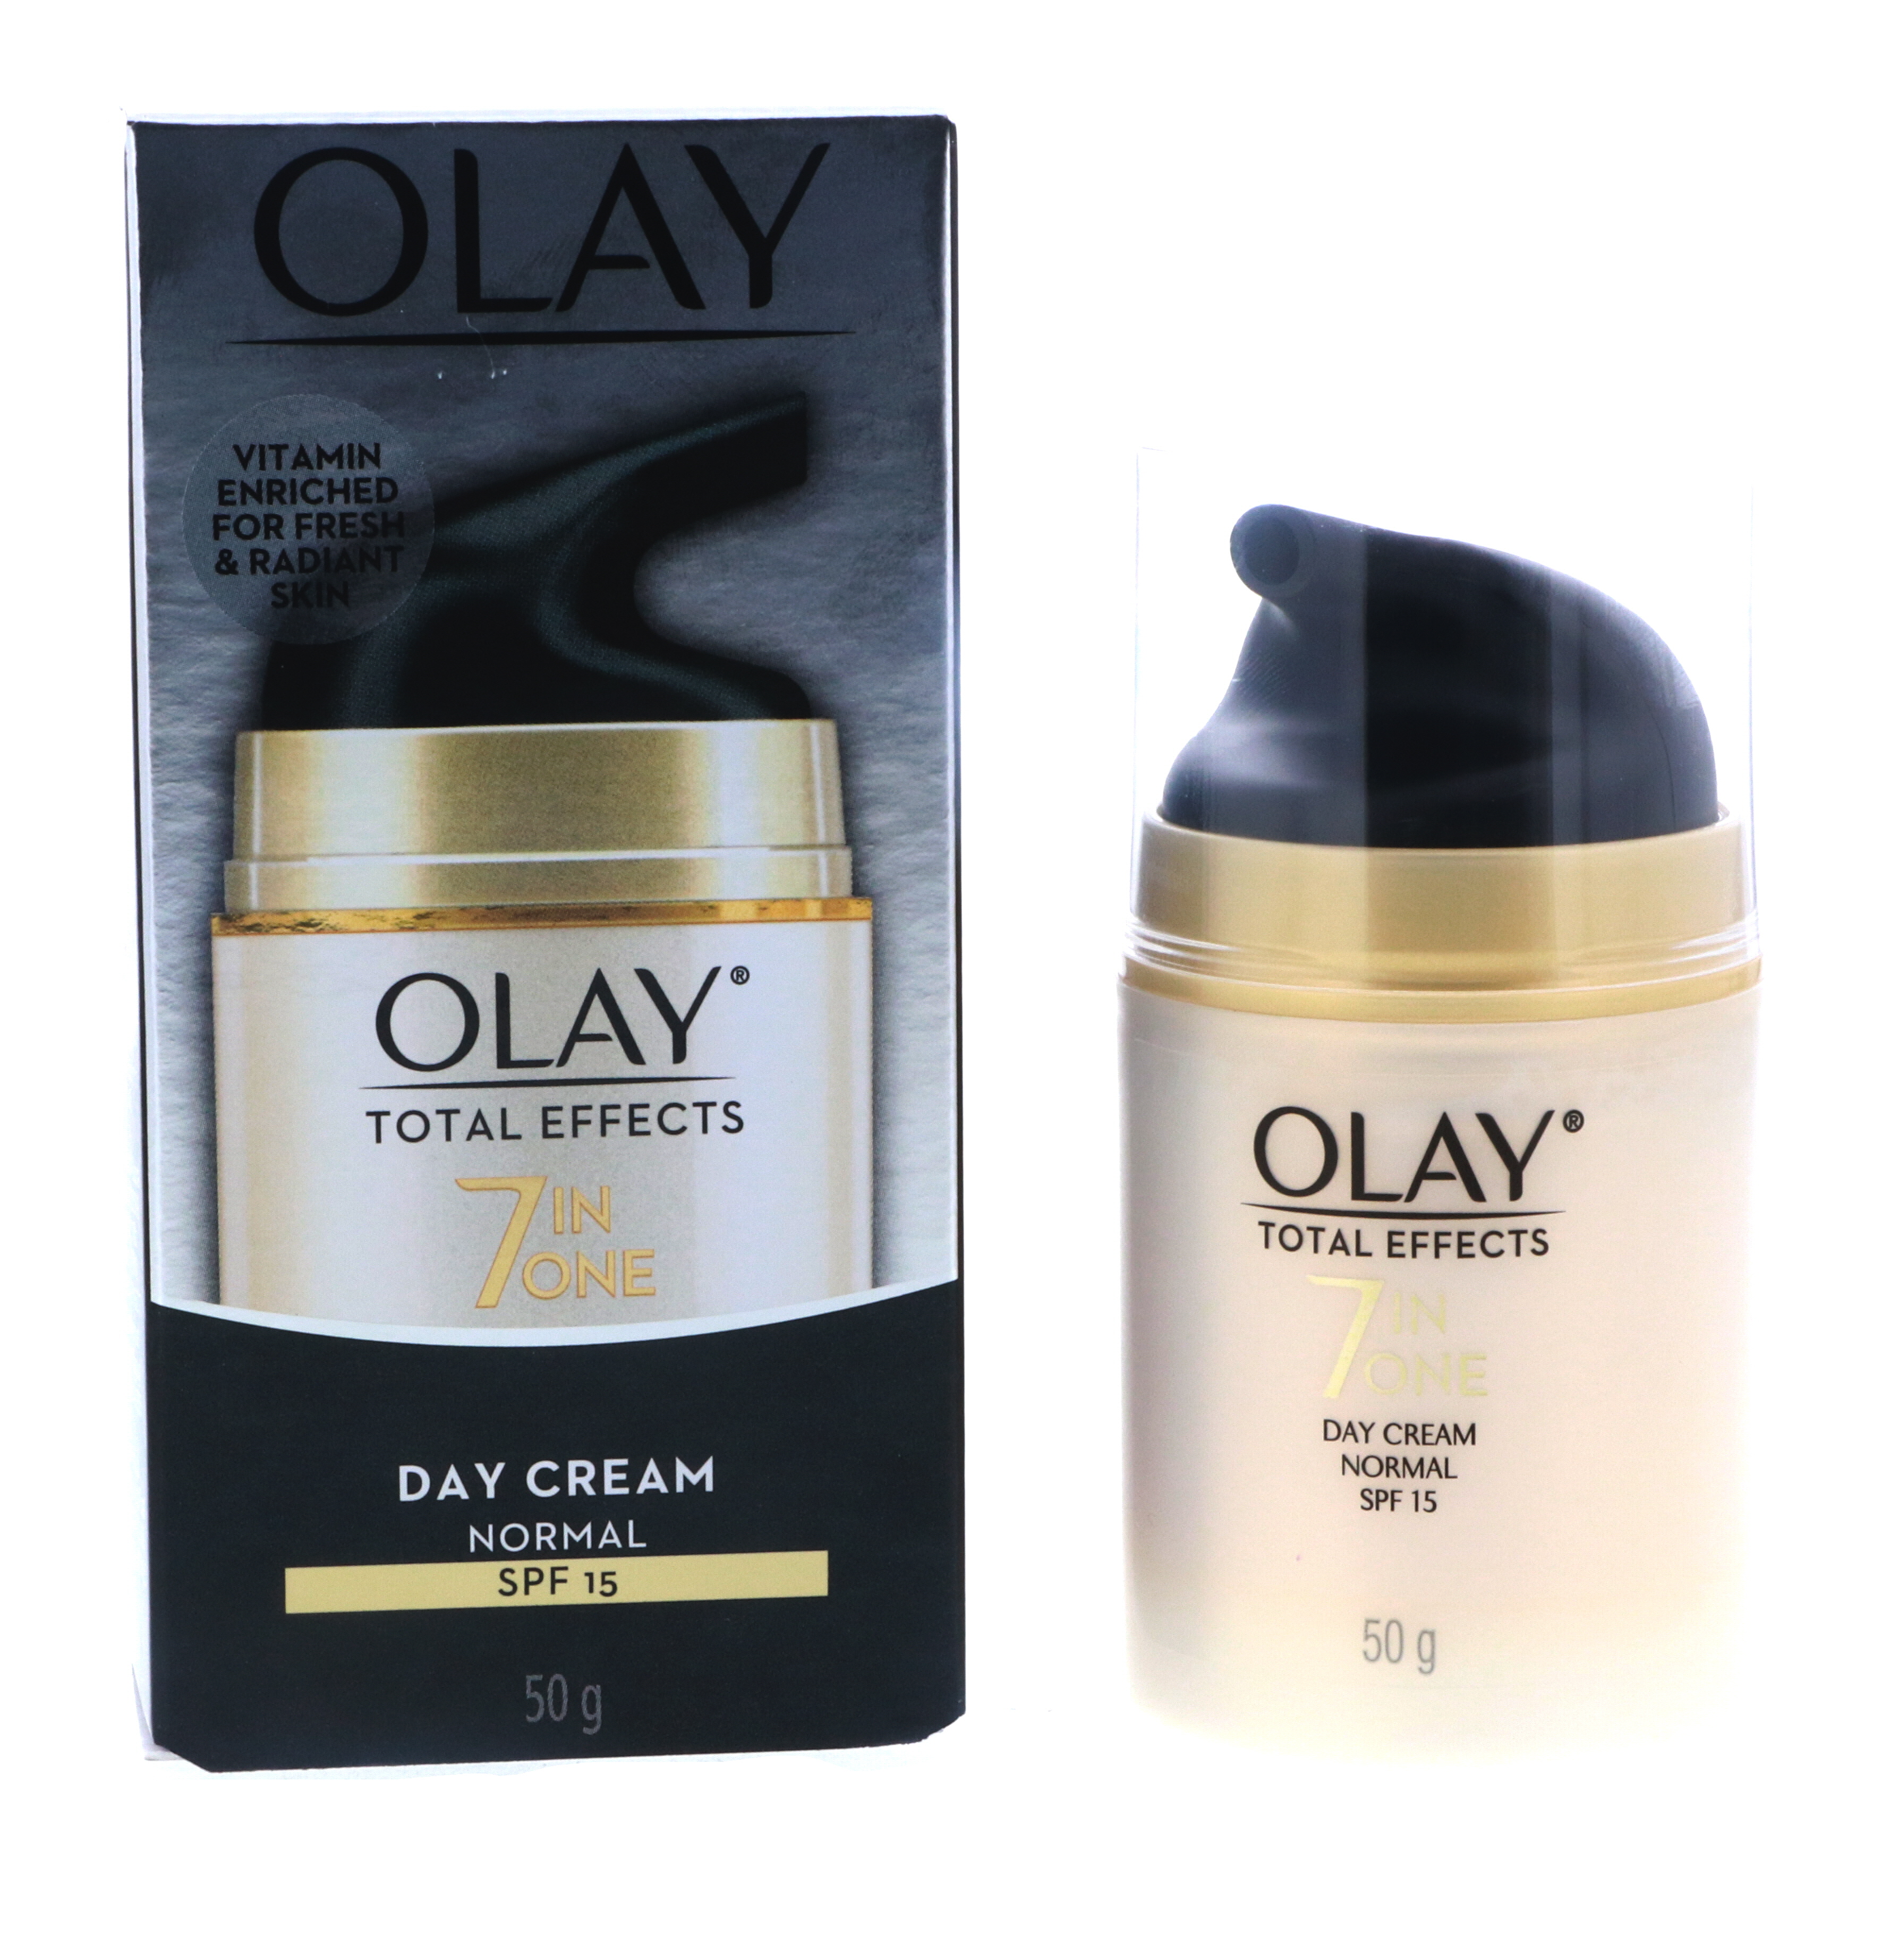 Olay Total Effects 7-in-1 Day Cream Normal SPF15, 1.7 oz - image 1 of 2